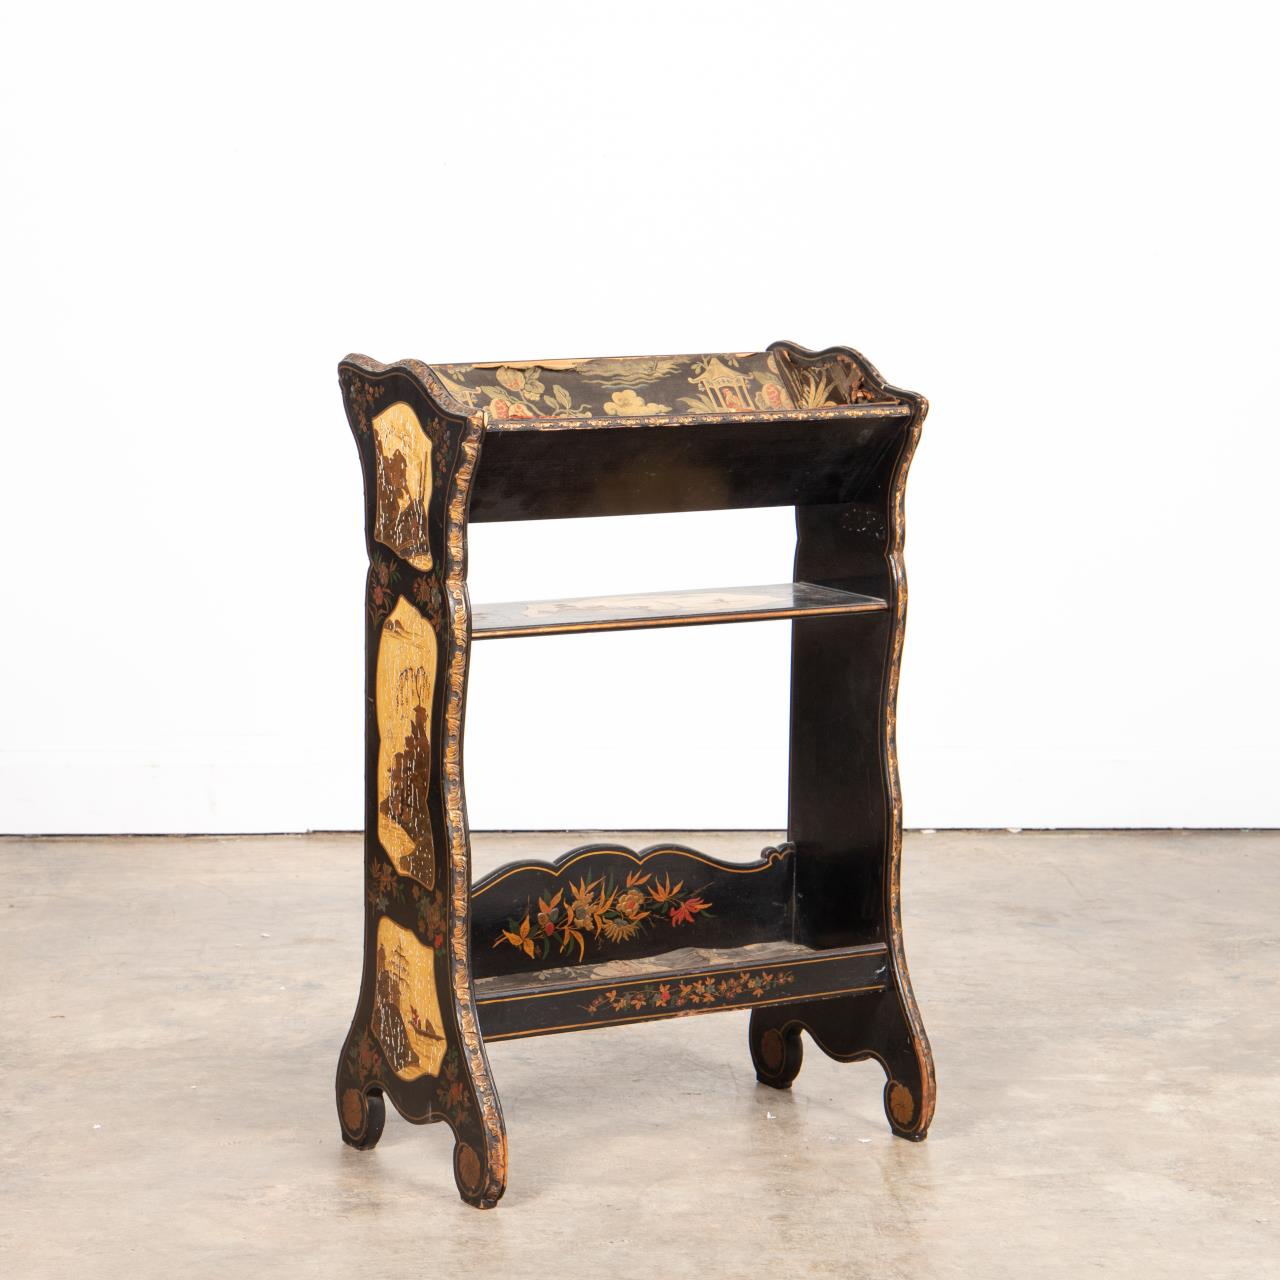 19TH C. FRENCH LACQUERED CHINOISERIE